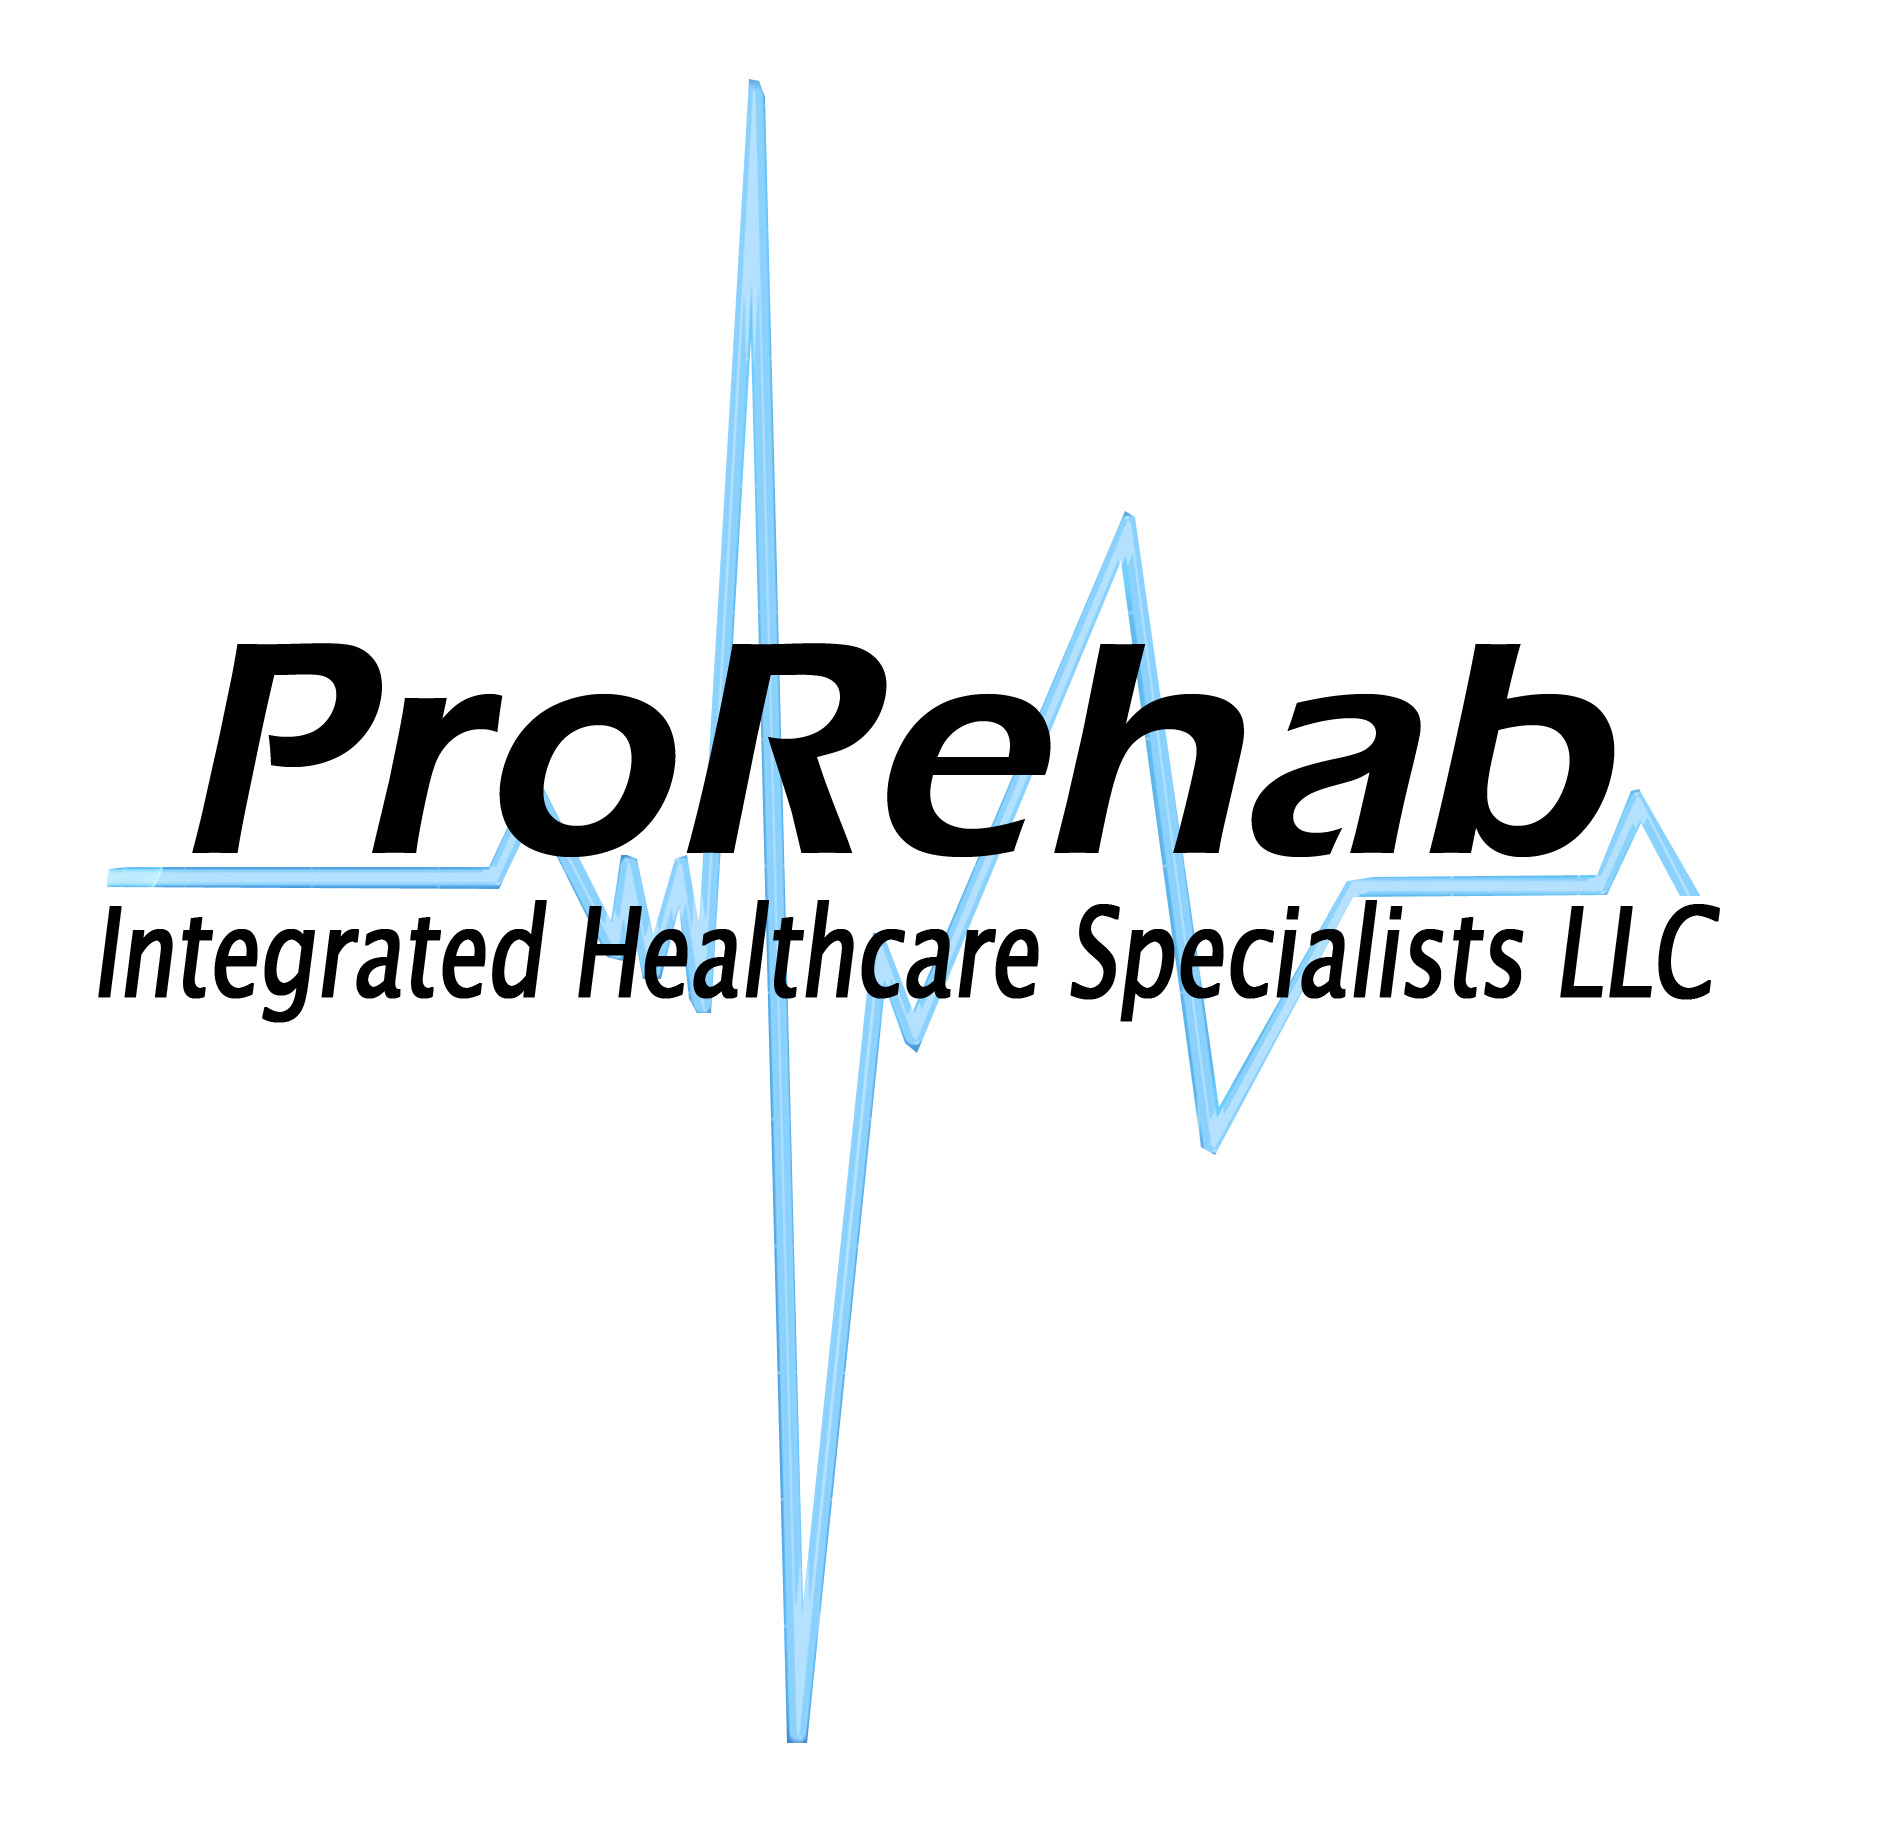 ProRehab Integrated Healthcare Specialists LLC